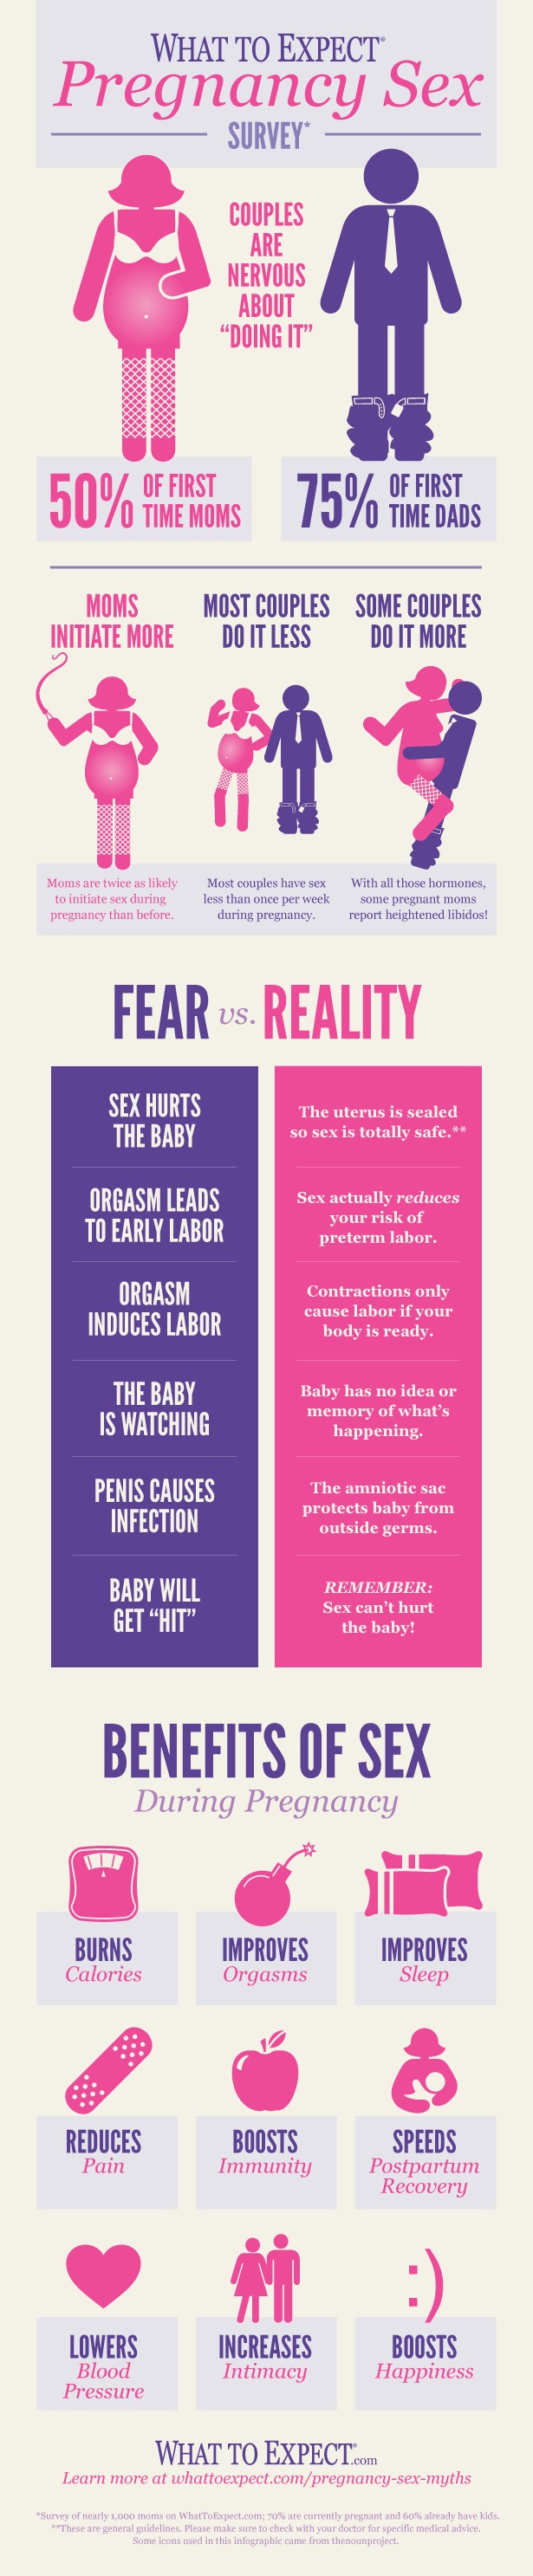 Sex During Pregnancy A Survey Infographic 8379